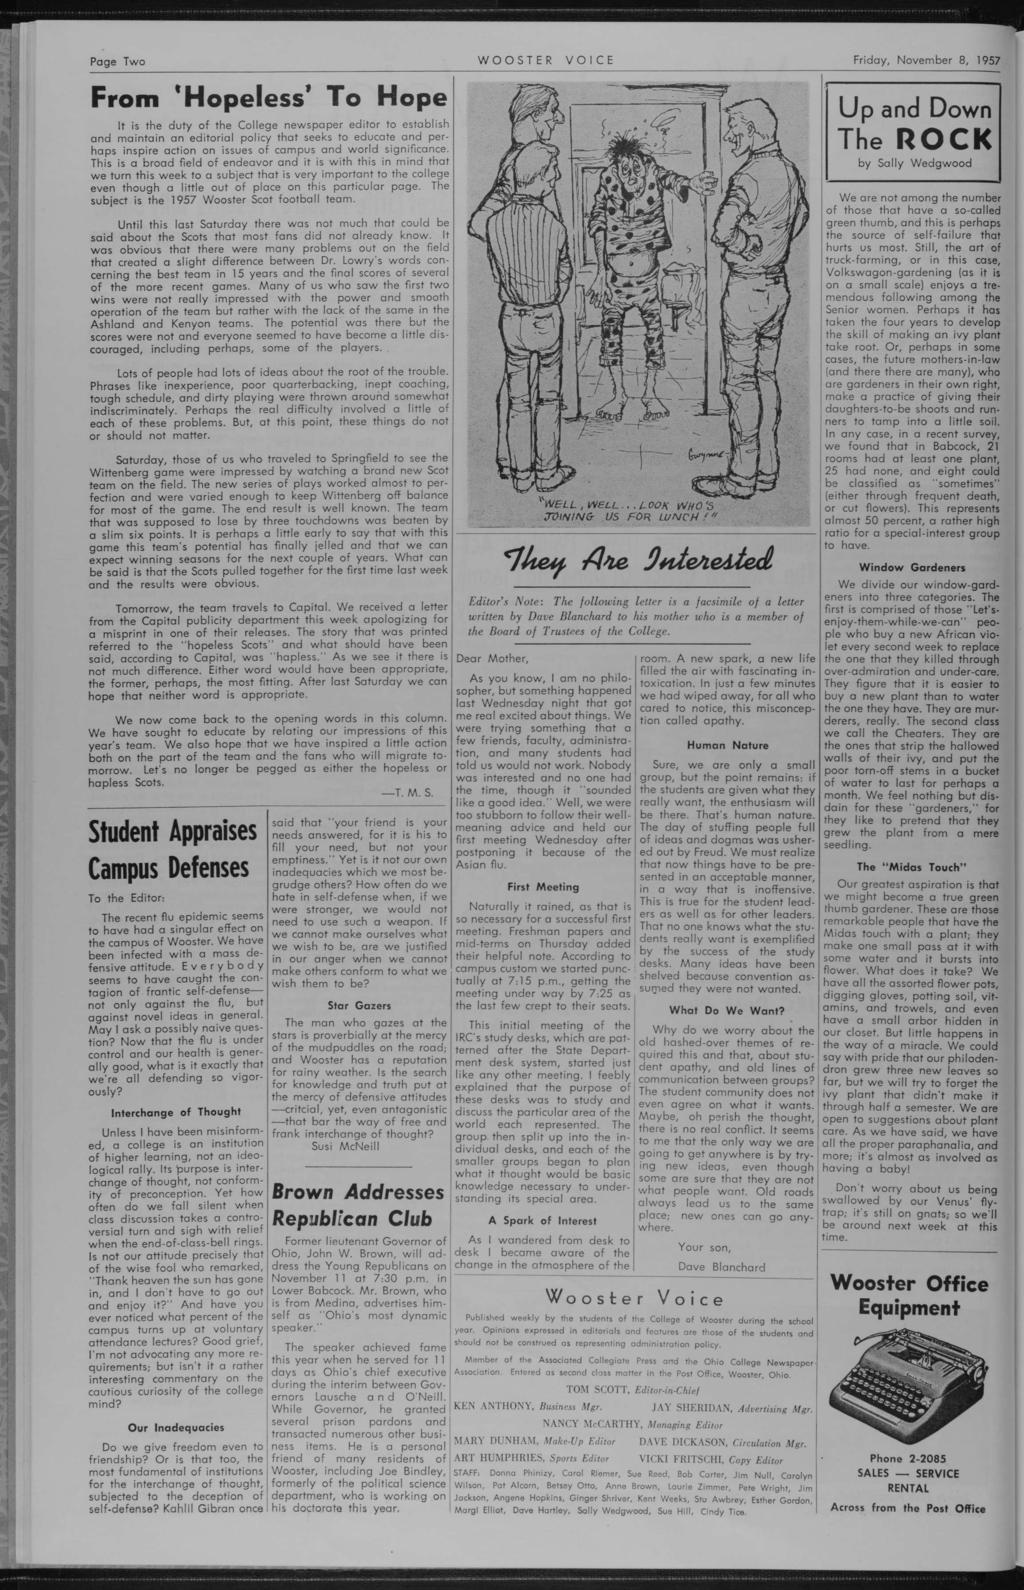 Page Two From 'Hopeless To Hope t s the duty of the College newspaper edtor to establsh and mantan an edtoral polcy that seeks to educate and perhaps nspre acton on ssues of campus and world